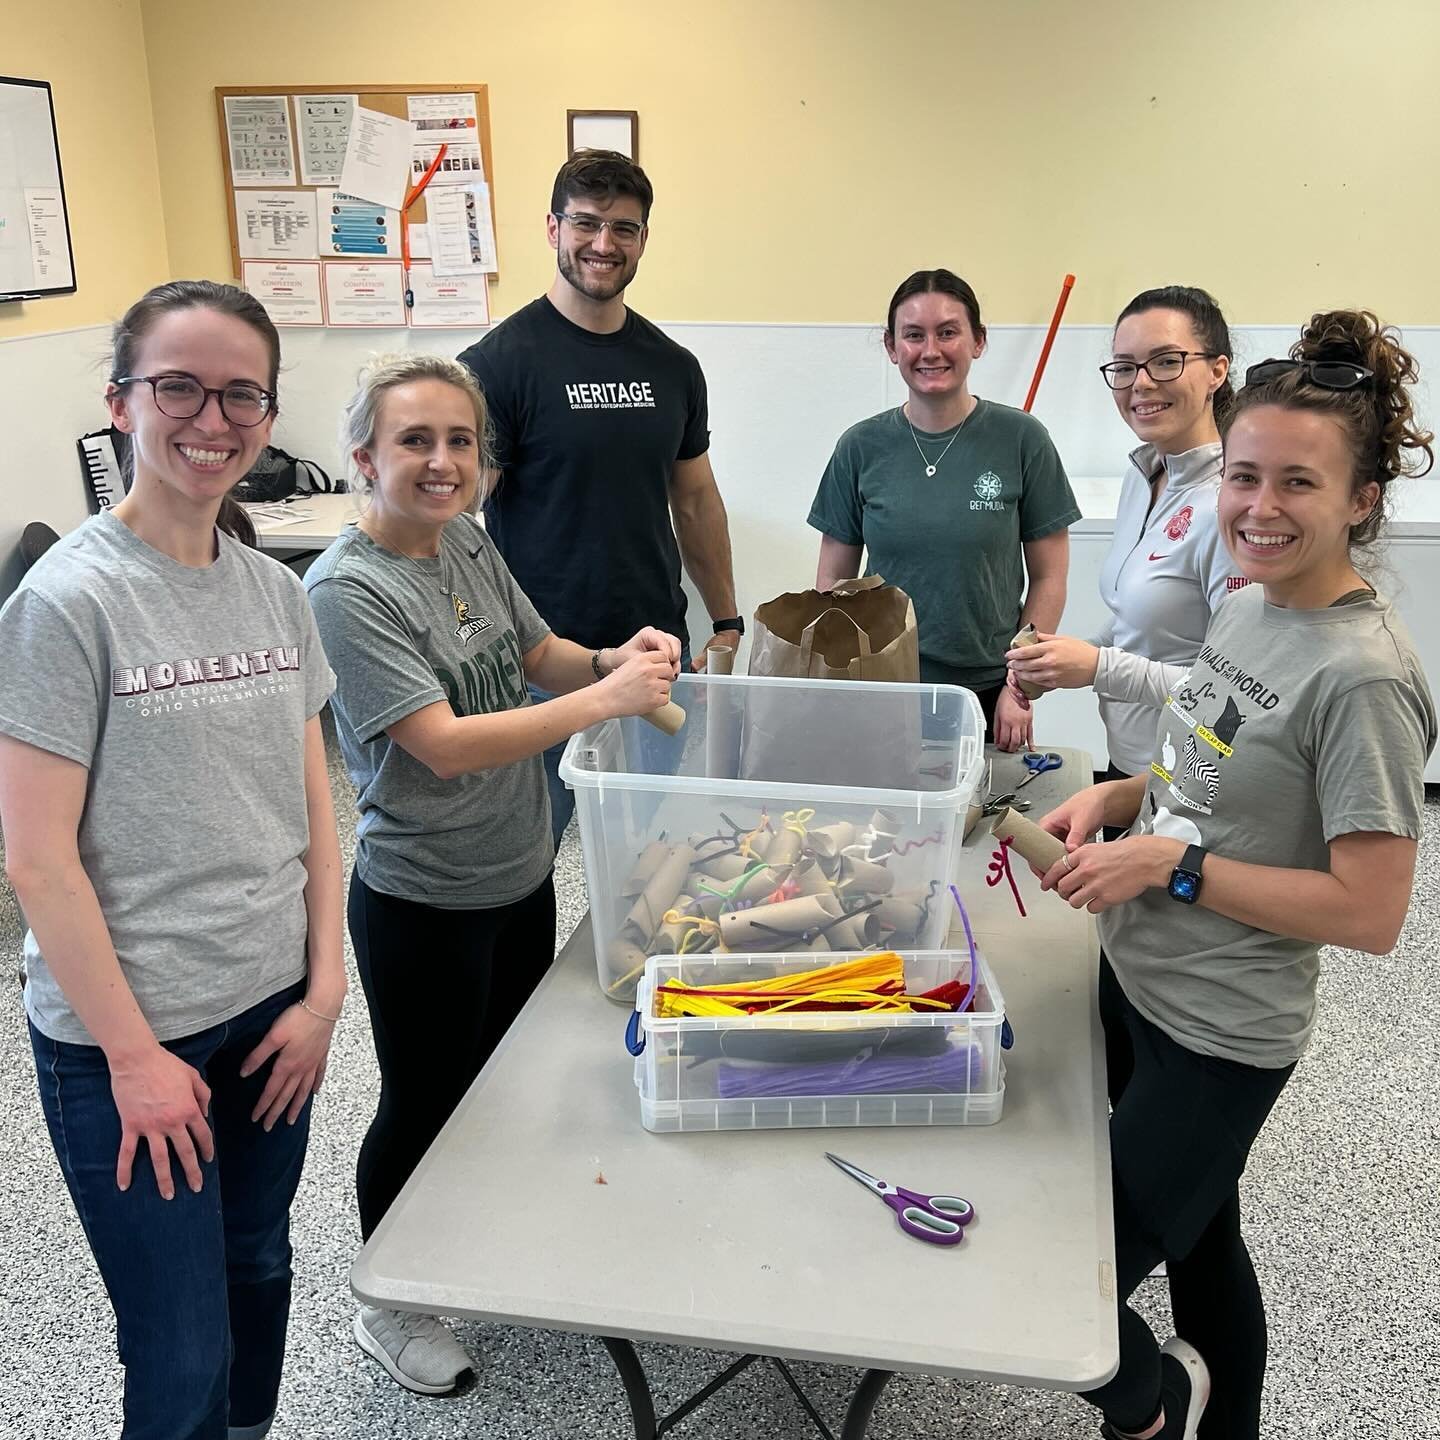 All our gratitude to Ohio University Heritage College of Osteopathic Medicine for volunteering with us recently! This group was fast and efficient! They were a huge help setting up for volunteer orientation, organizing supplies, and making cat enrich